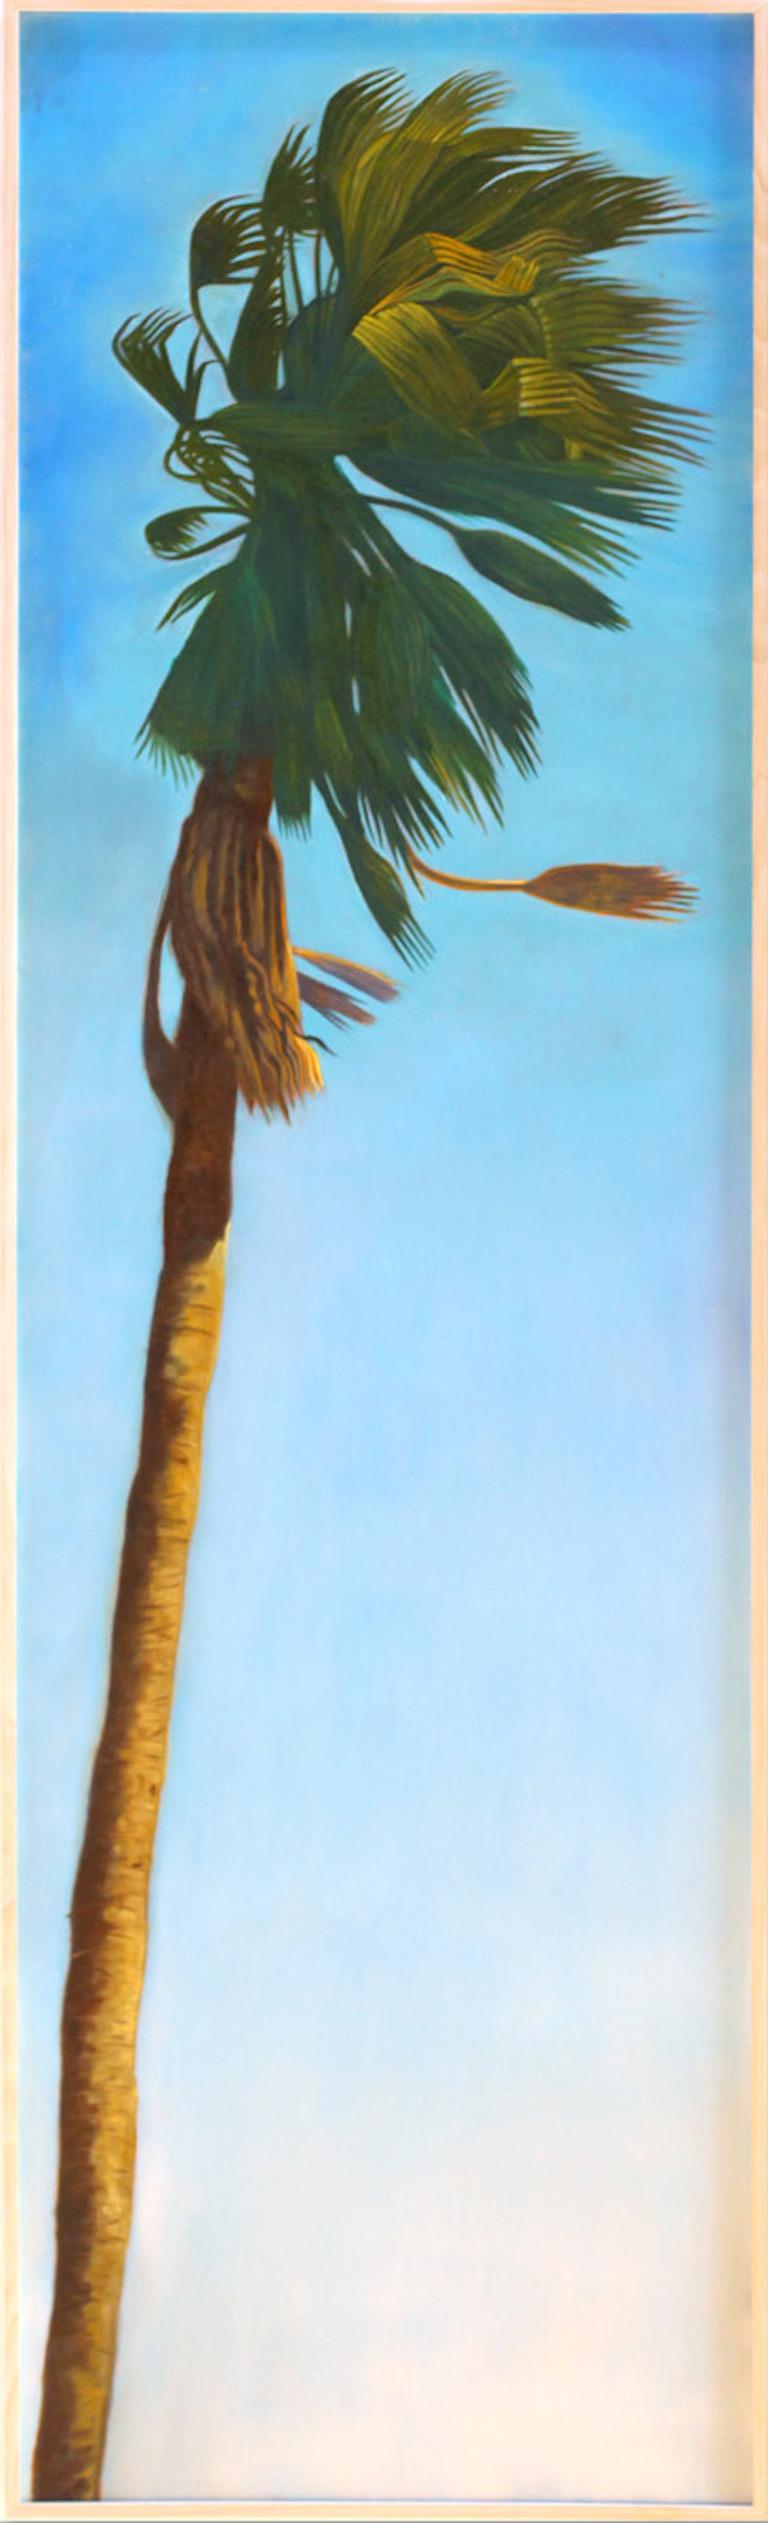 Perry Vàsquez Landscape Painting - Contemporary Realist Palm Tree Painting, "Oasis 3"